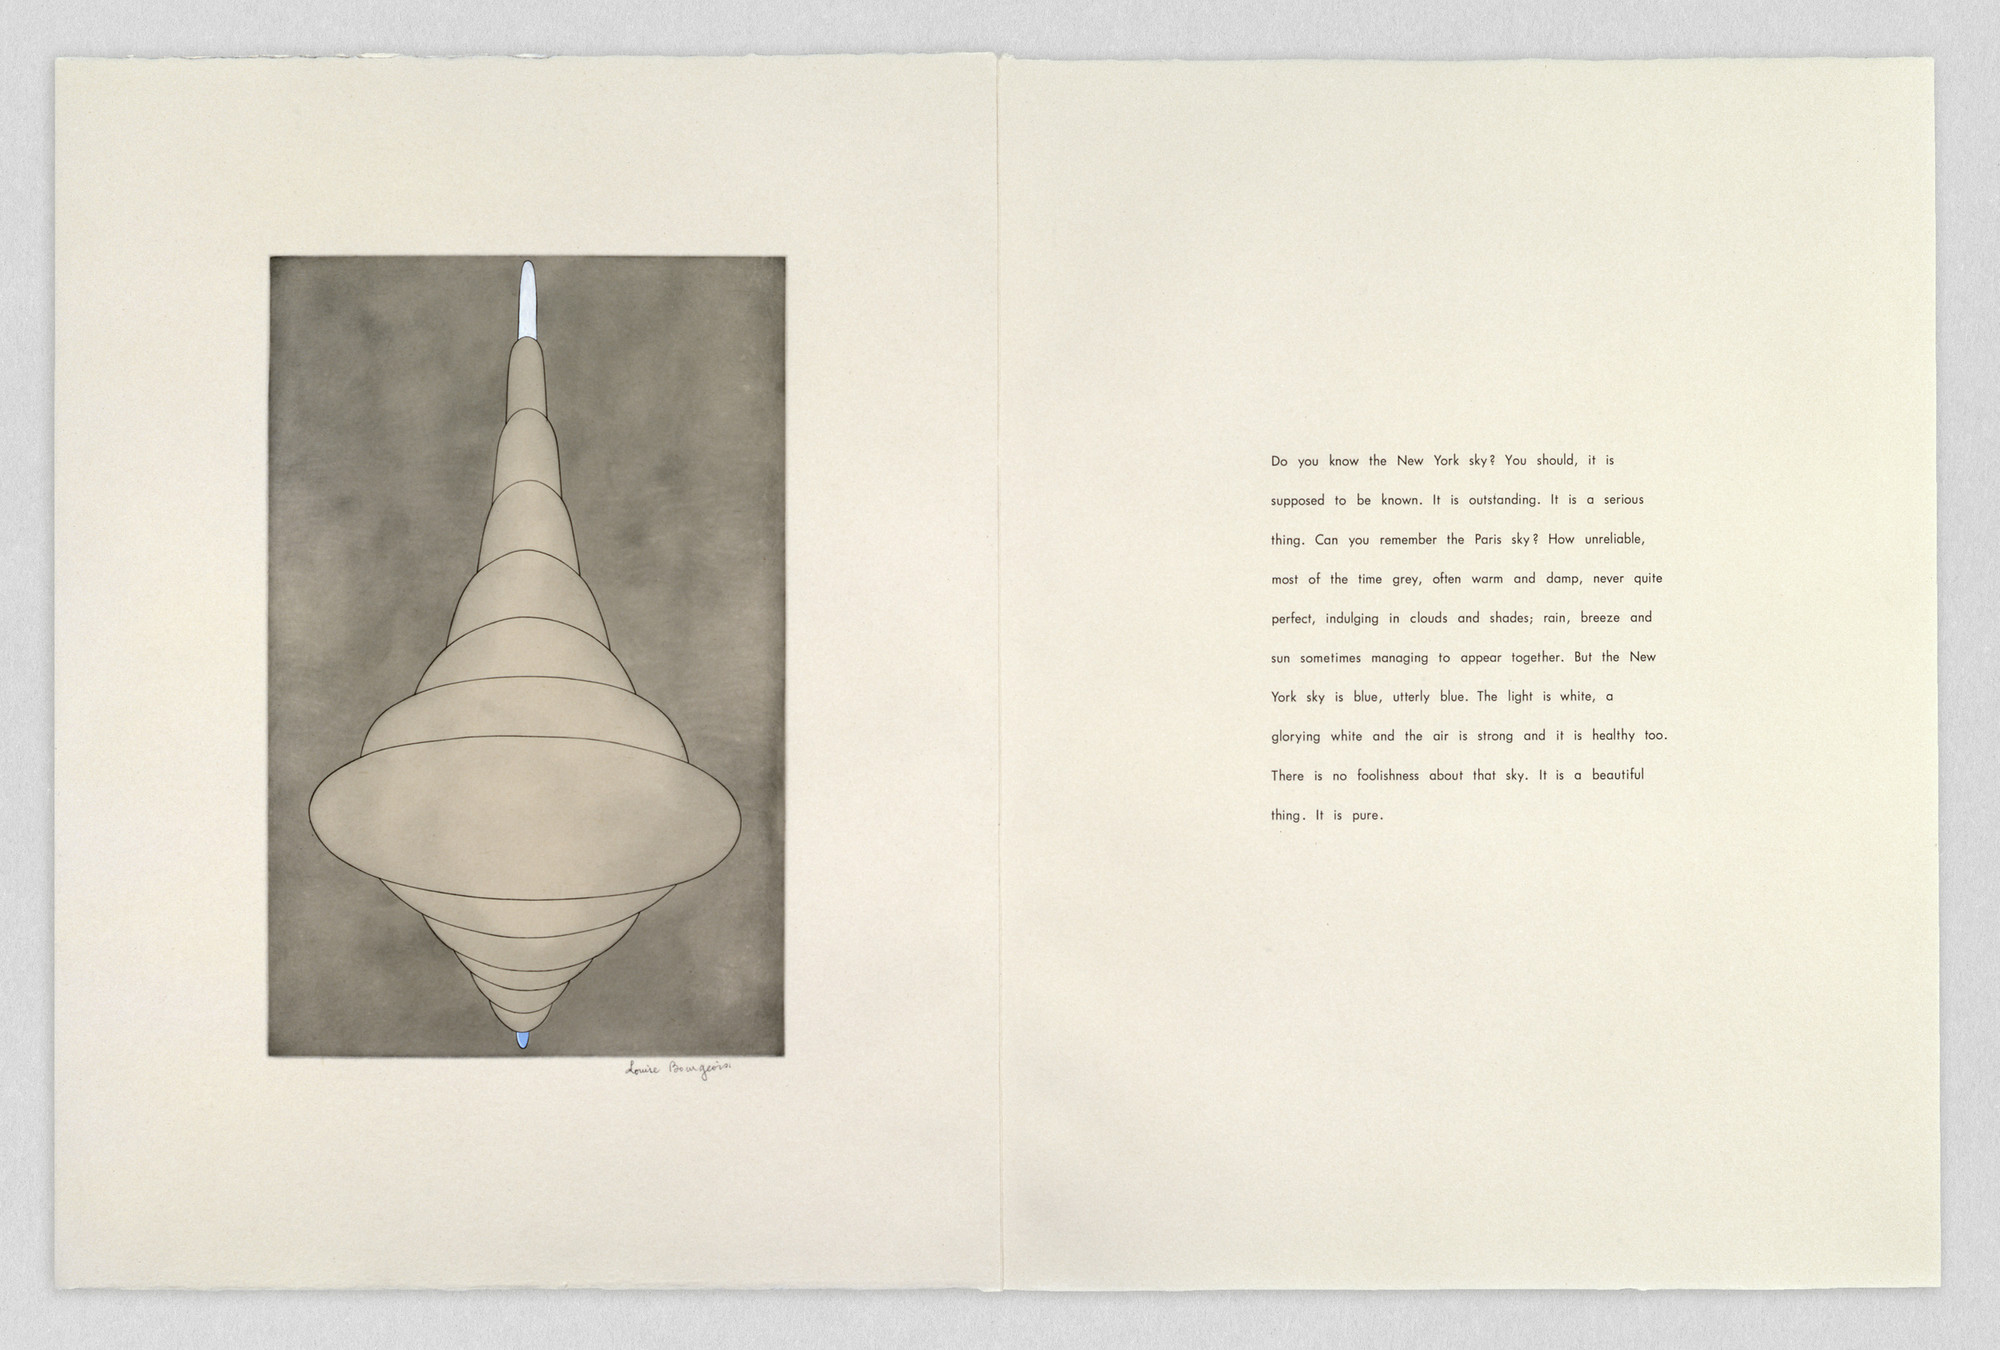 Plate 1 of 8 from _the puritan,_ 1990-1997. Engraving, with selective wiping, gouache, and watercolor additions. Collection Louise Bourgeois Trust, New York. © 2017 The Easton Foundation/Licensed by VAGA, NY. LN2017.750.h